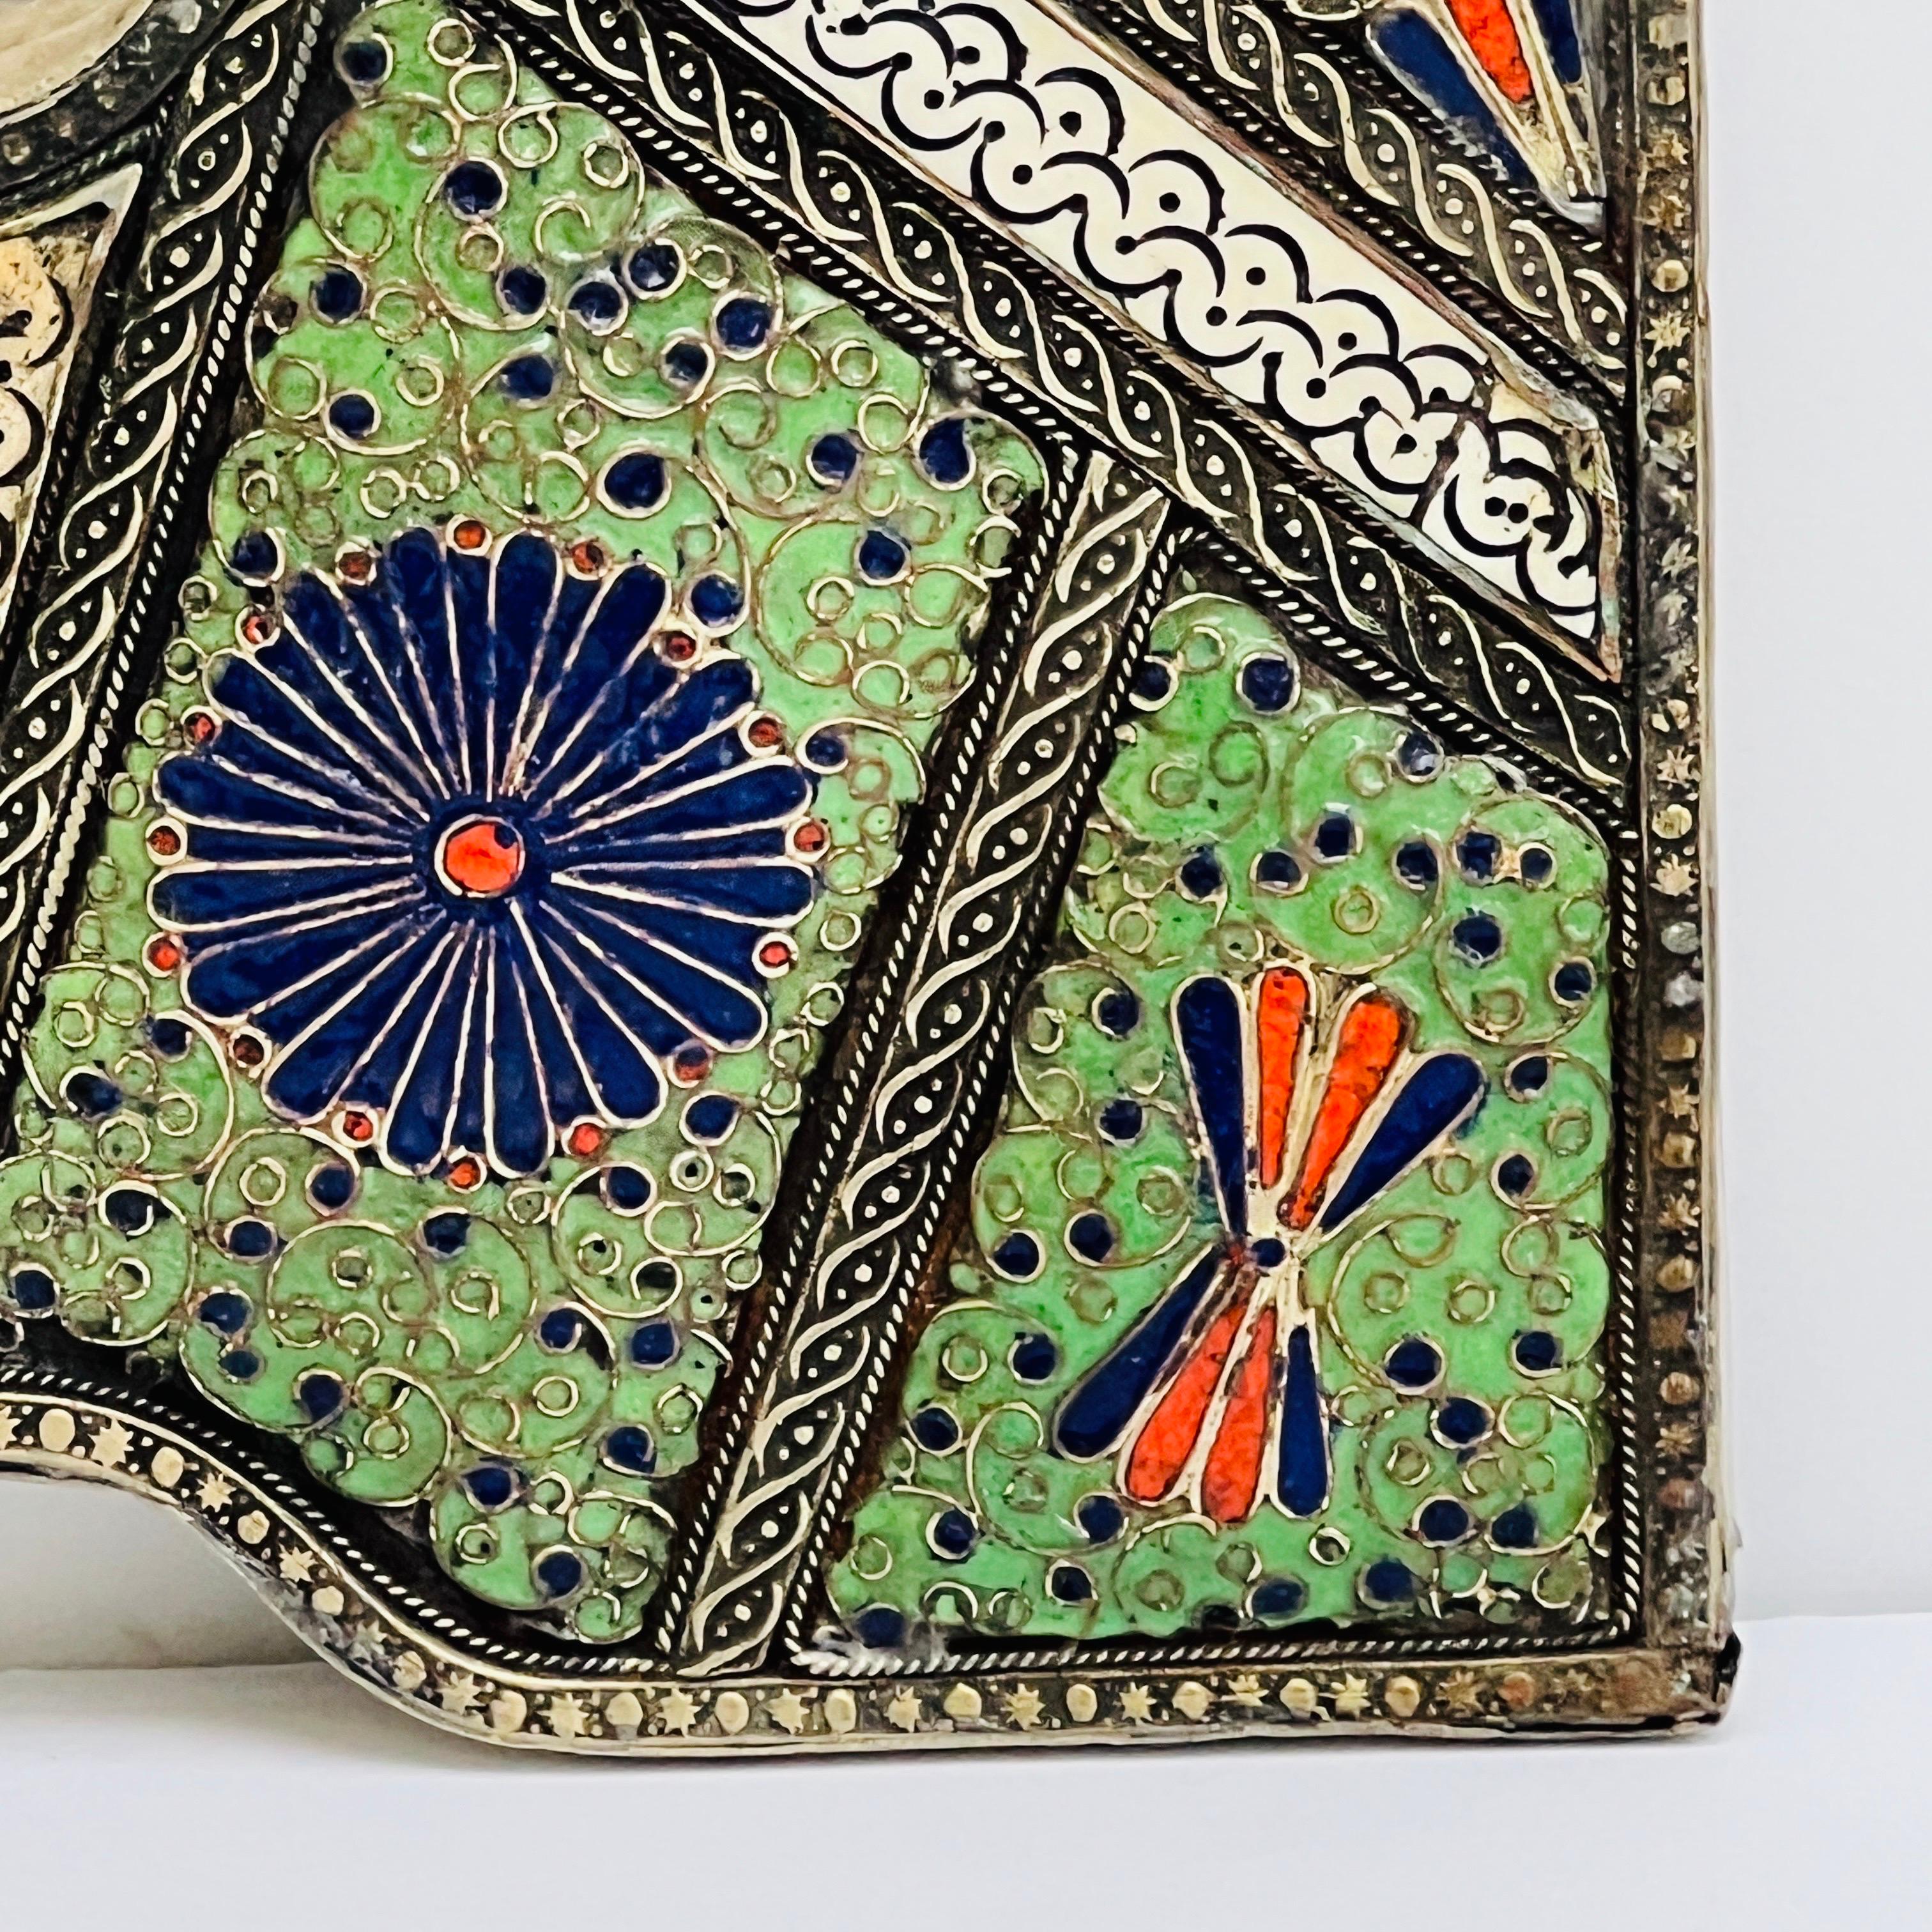 Metal Moorish Arch Mirror in Enameled Cloisonné with Bone Inlays, Morocco c. 1950's For Sale